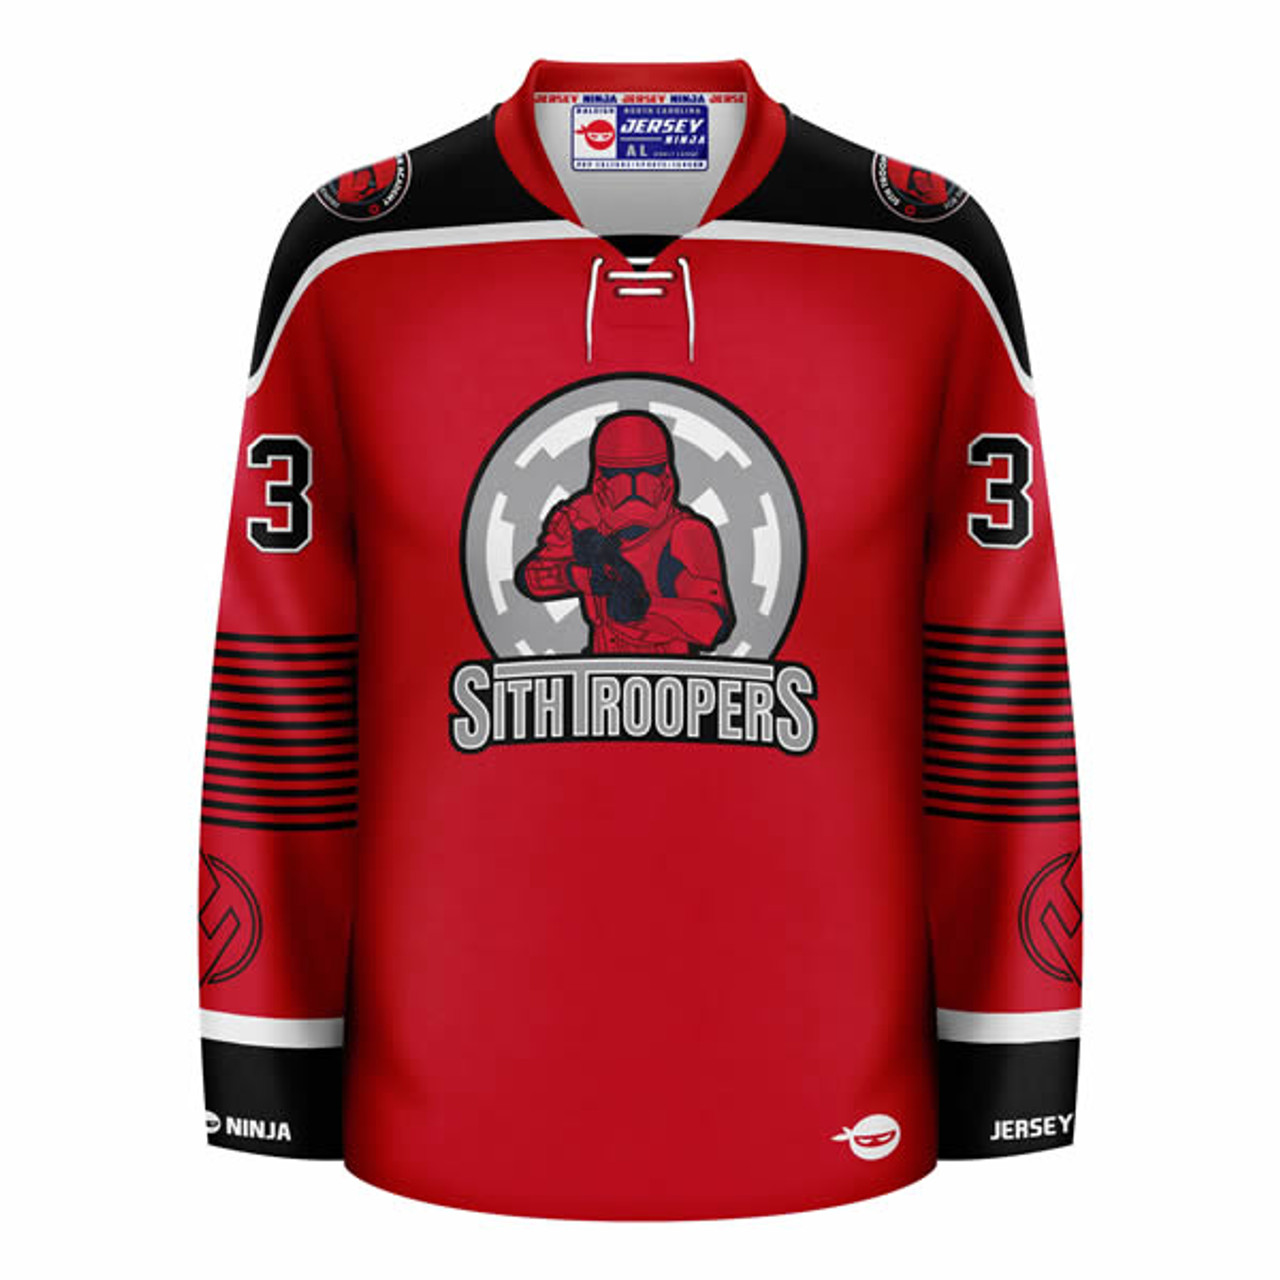 May the Force by with this hockey jersey : r/StarWars